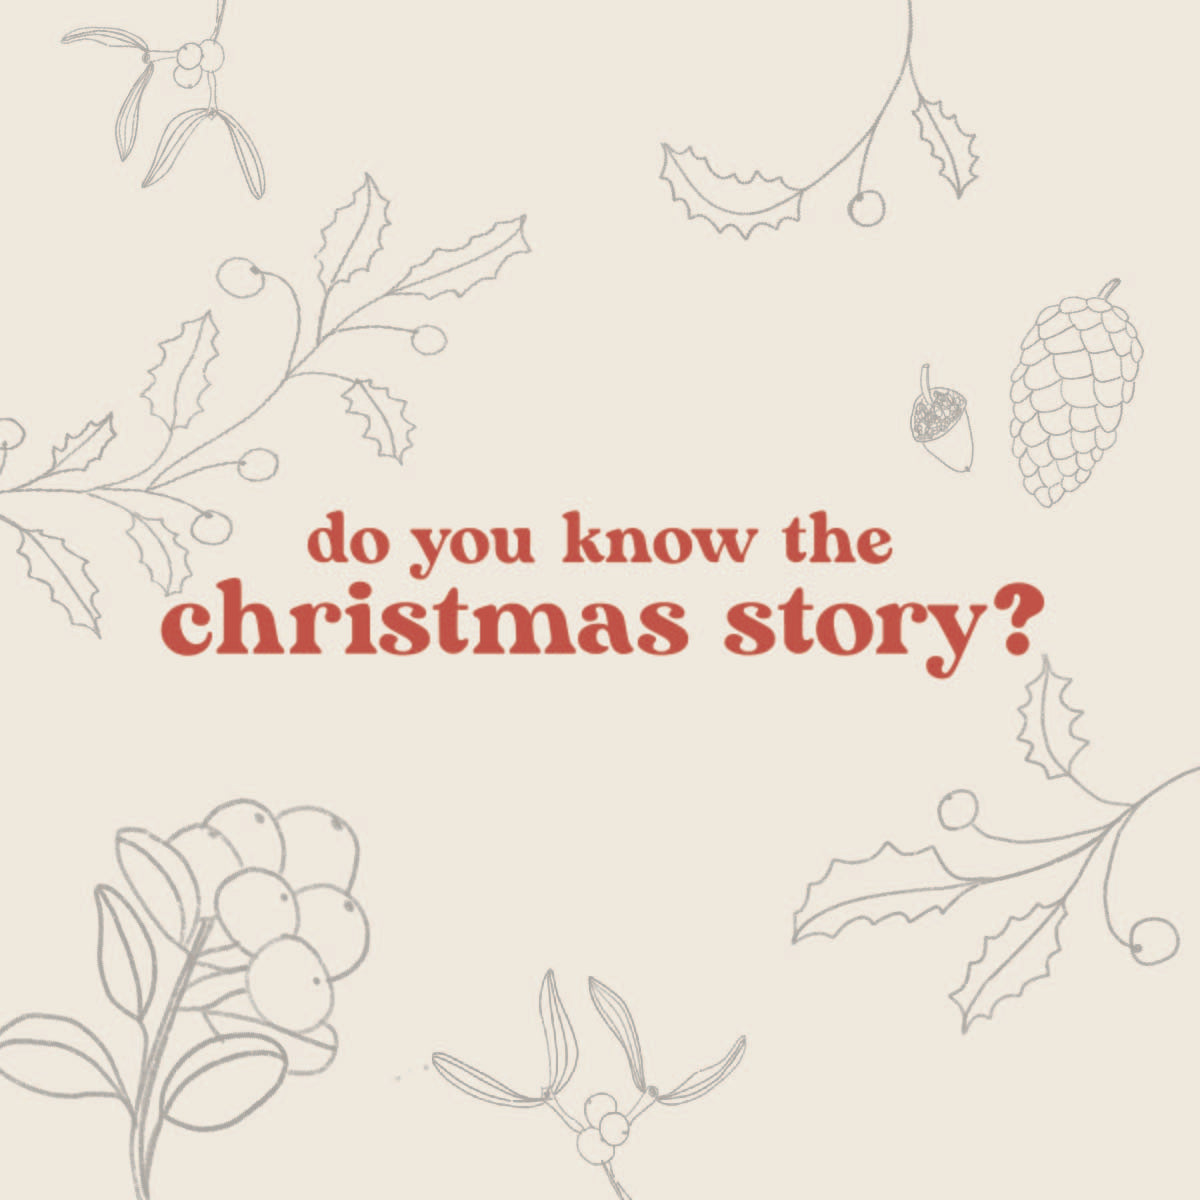 Do You Know The Christmas Story?